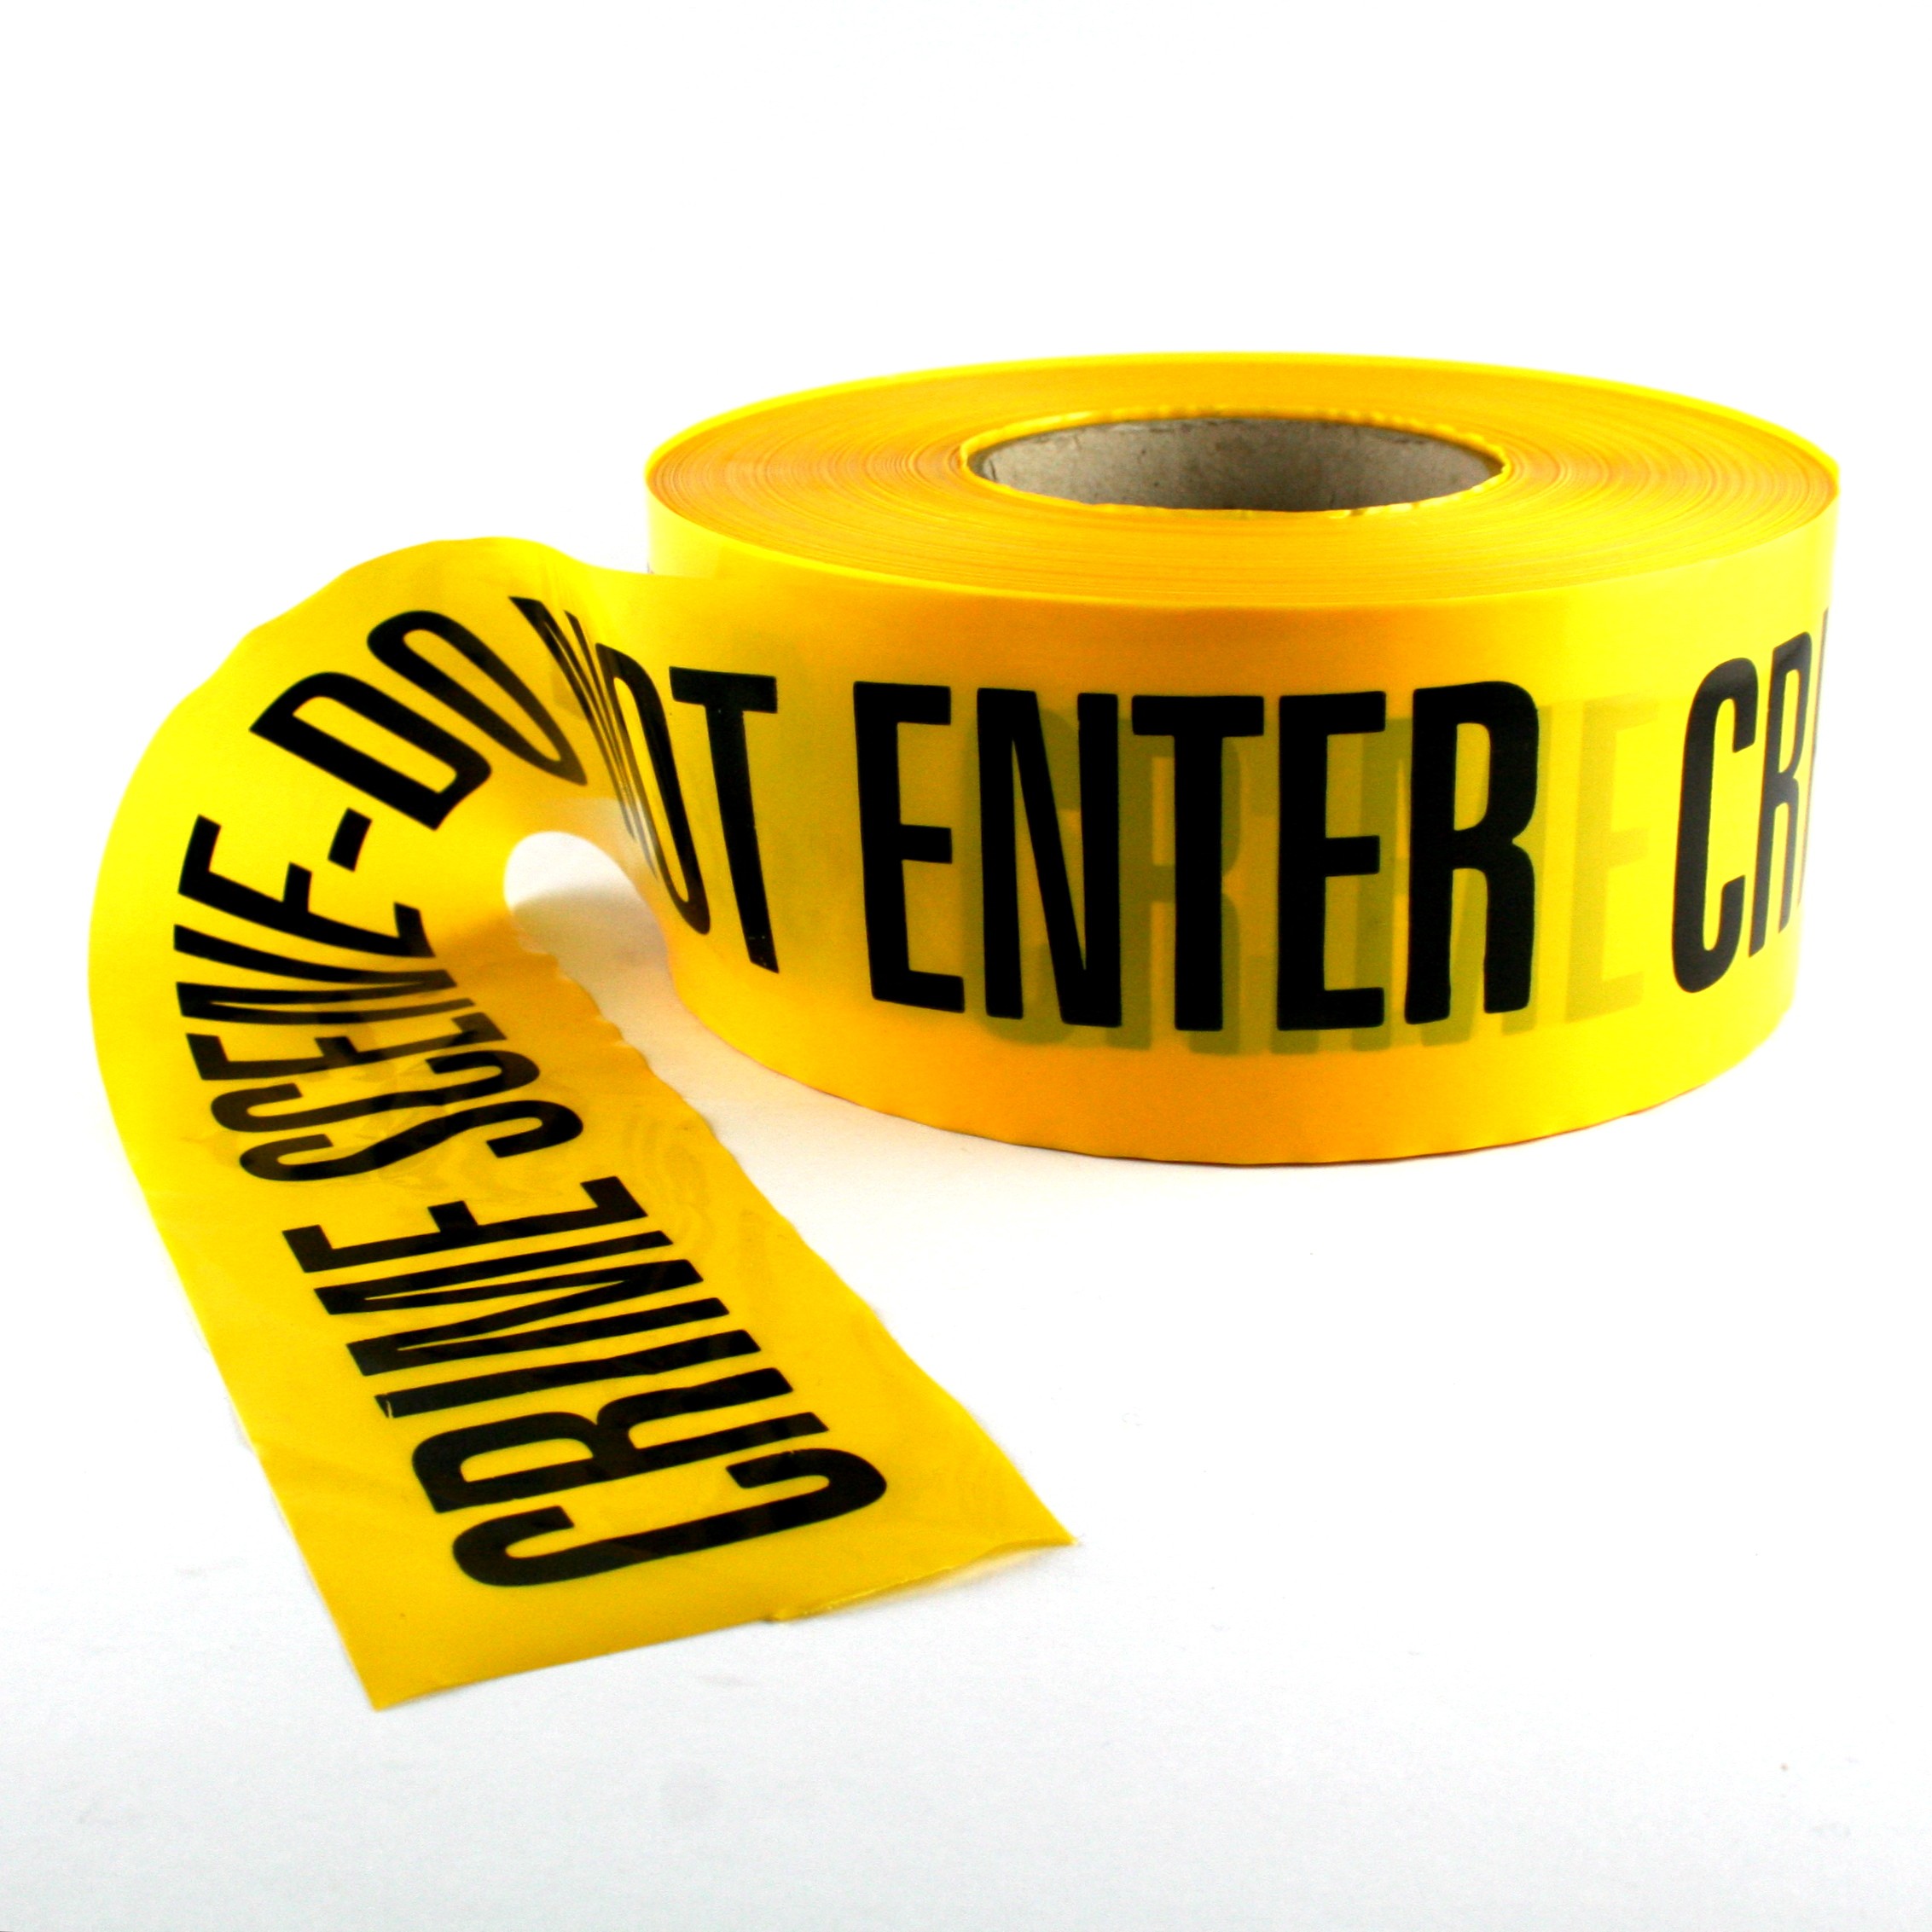 Free Crime Scene Tape, Download Free Crime Scene Tape png images, Free